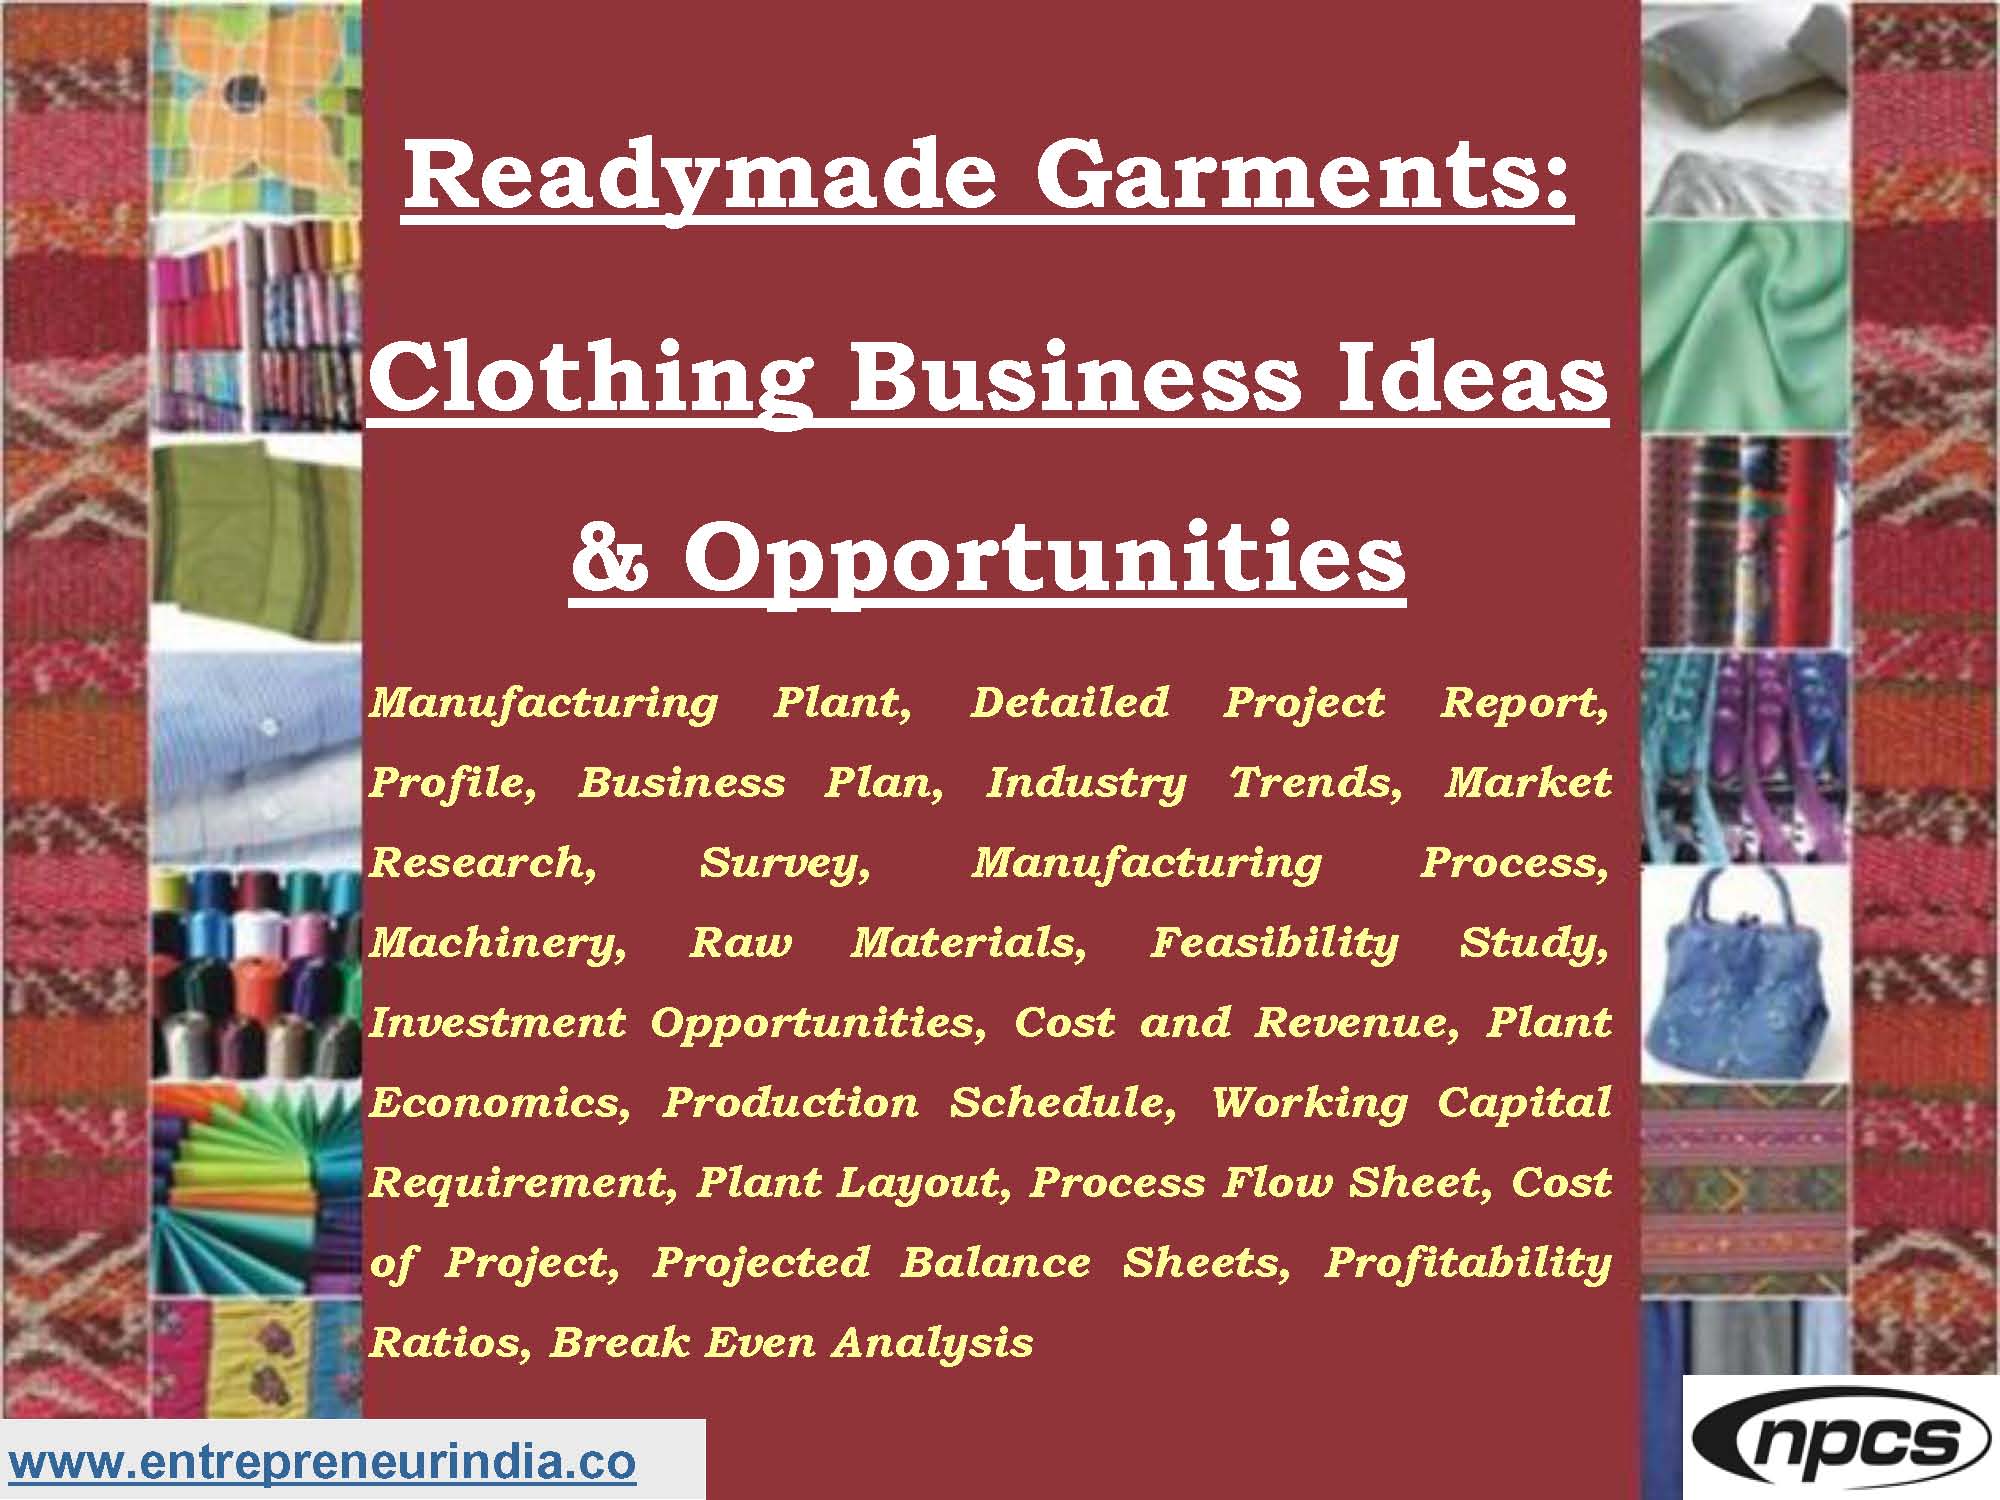 Readymade Garments Clothing Business Ideas & Opportunities.jpg